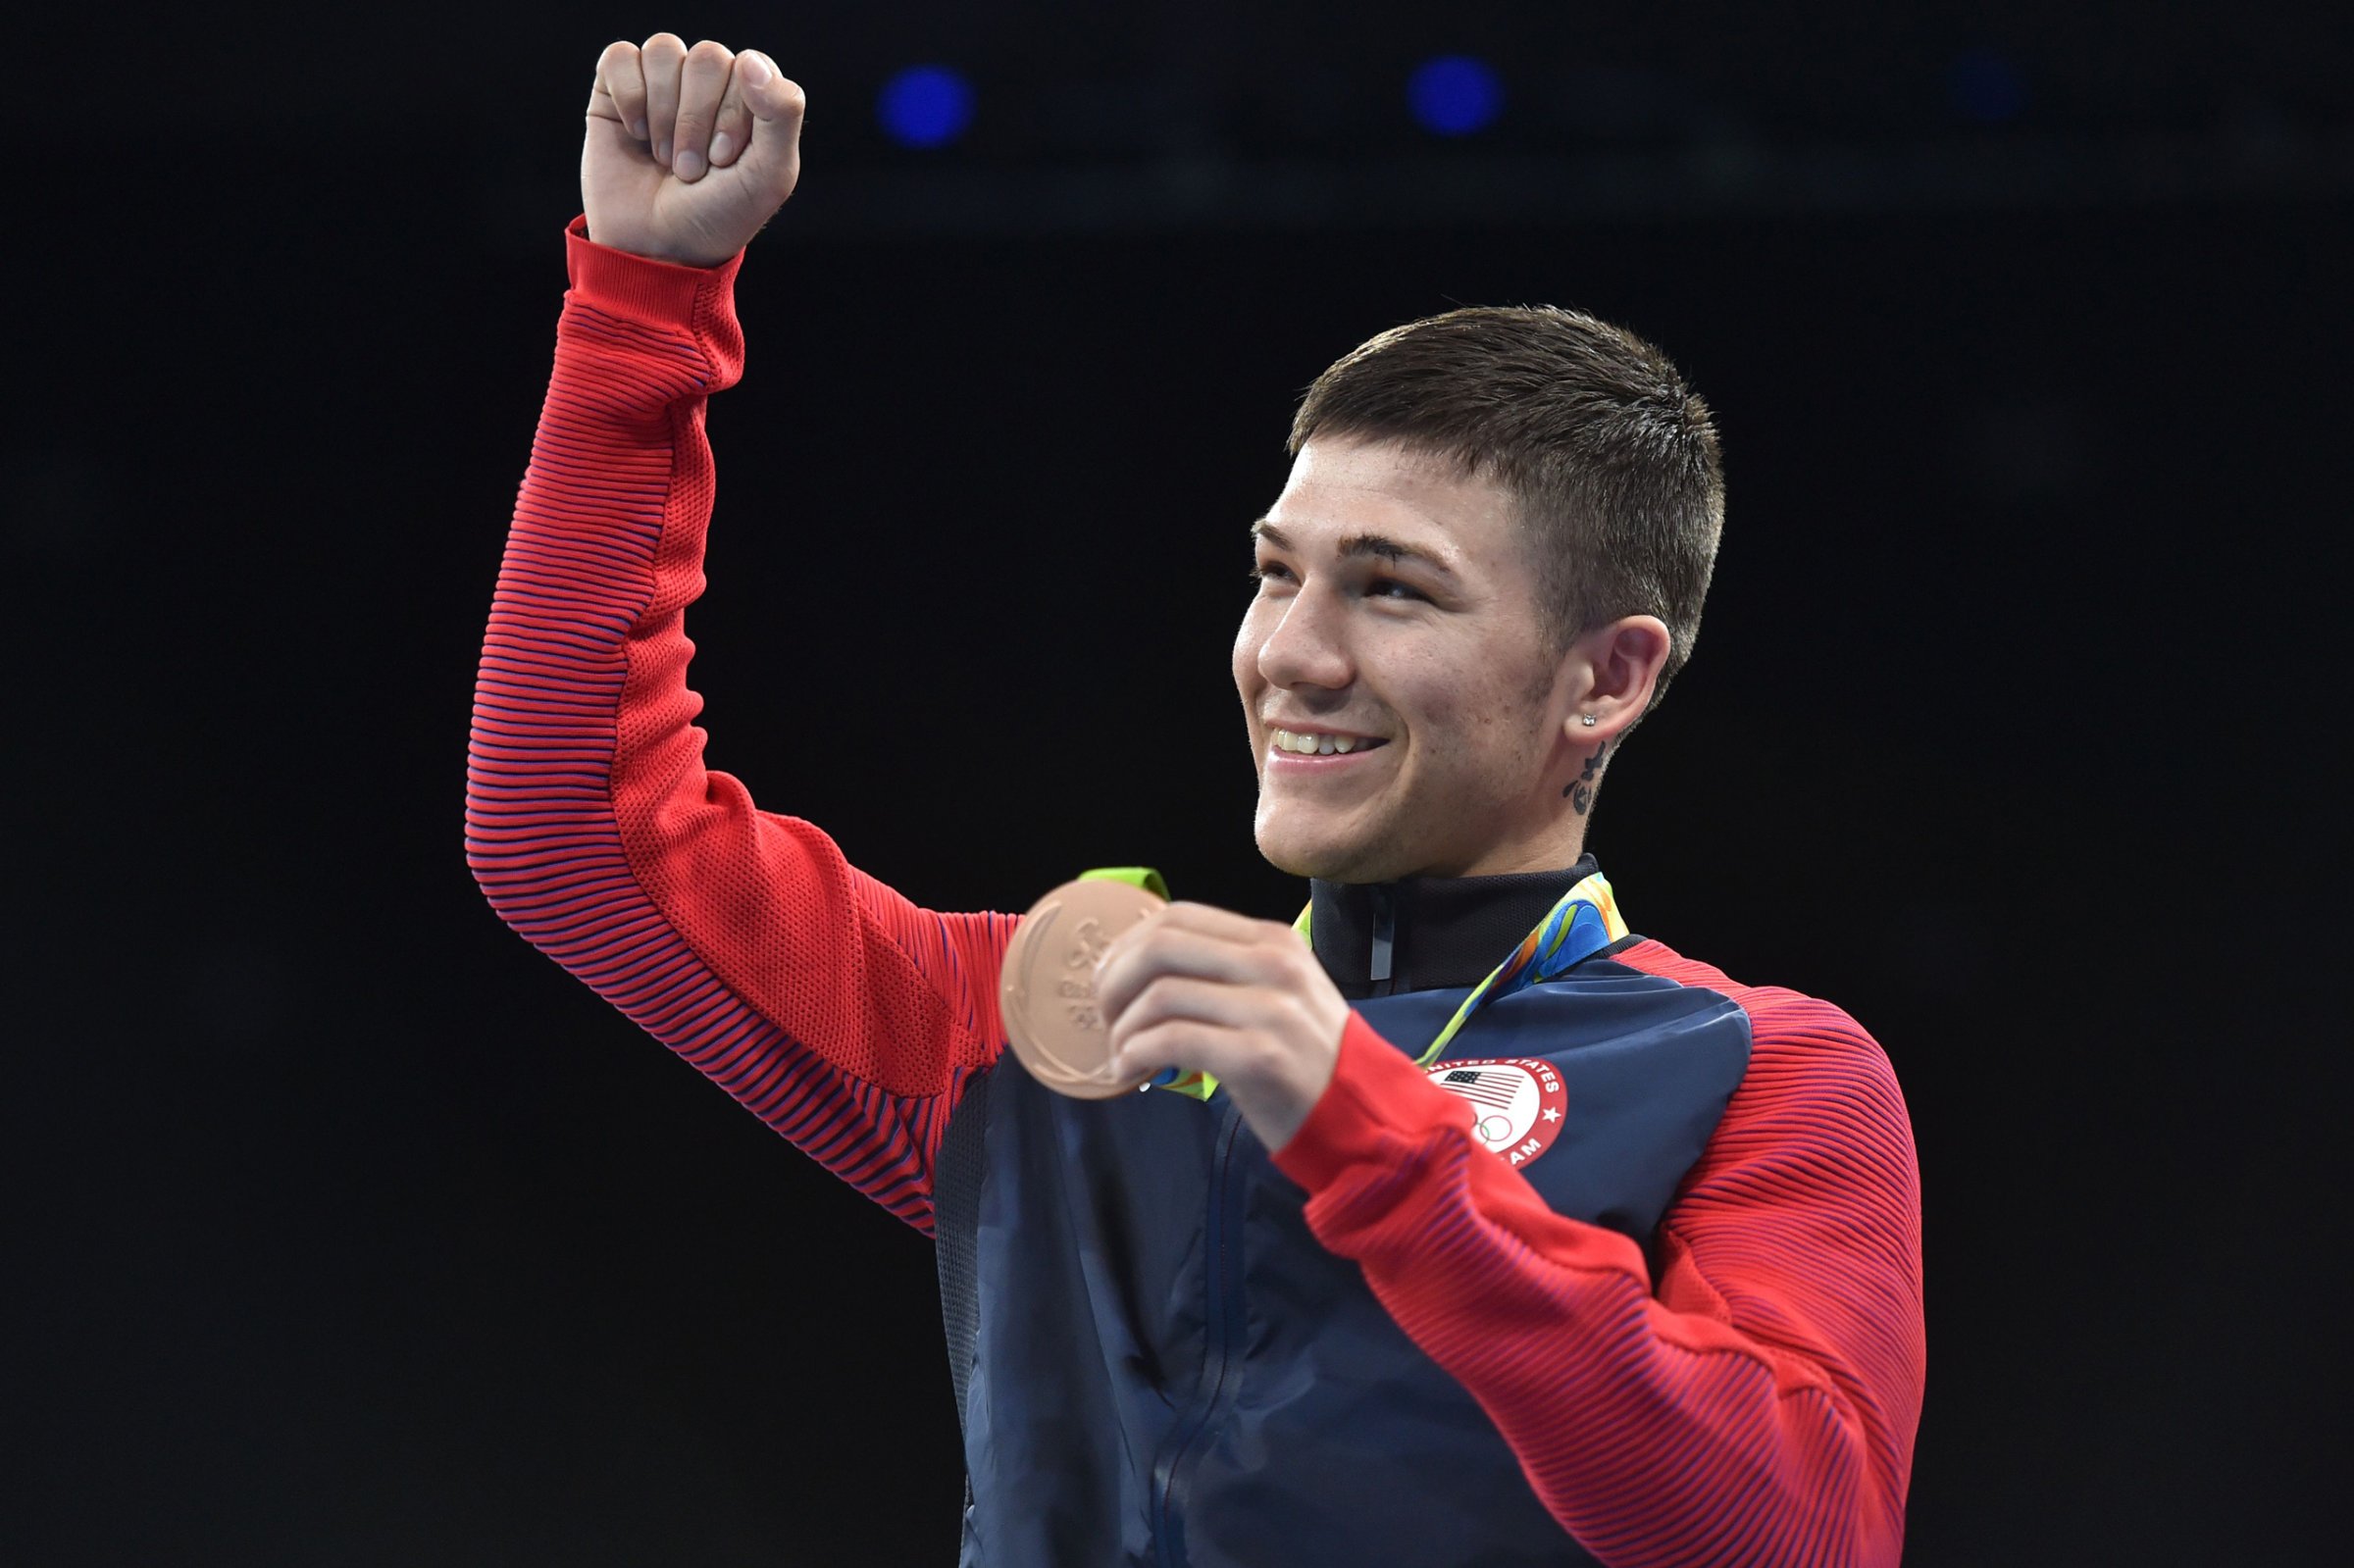 USA's Nico Miguel Hernandez poses with his medal after winning in the boxing matches in the Rio Olympics at the Rio 2016 Olympic Games in Rio de Janeiro on August 14, 2016. Hasanboy Dusmatov won Uzbekistan's first gold medal of the Rio Olympics when he beat Colombia's Yurberjen Martinez on unanimous points. Bronze medals went to Cuba's Joahnys Argilagos of Cuba and the American Nico Hernandez, who each lost in the semi-finals. / AFP / YURI CORTEZ (Photo credit should read YURI CORTEZ/AFP/Getty Images)